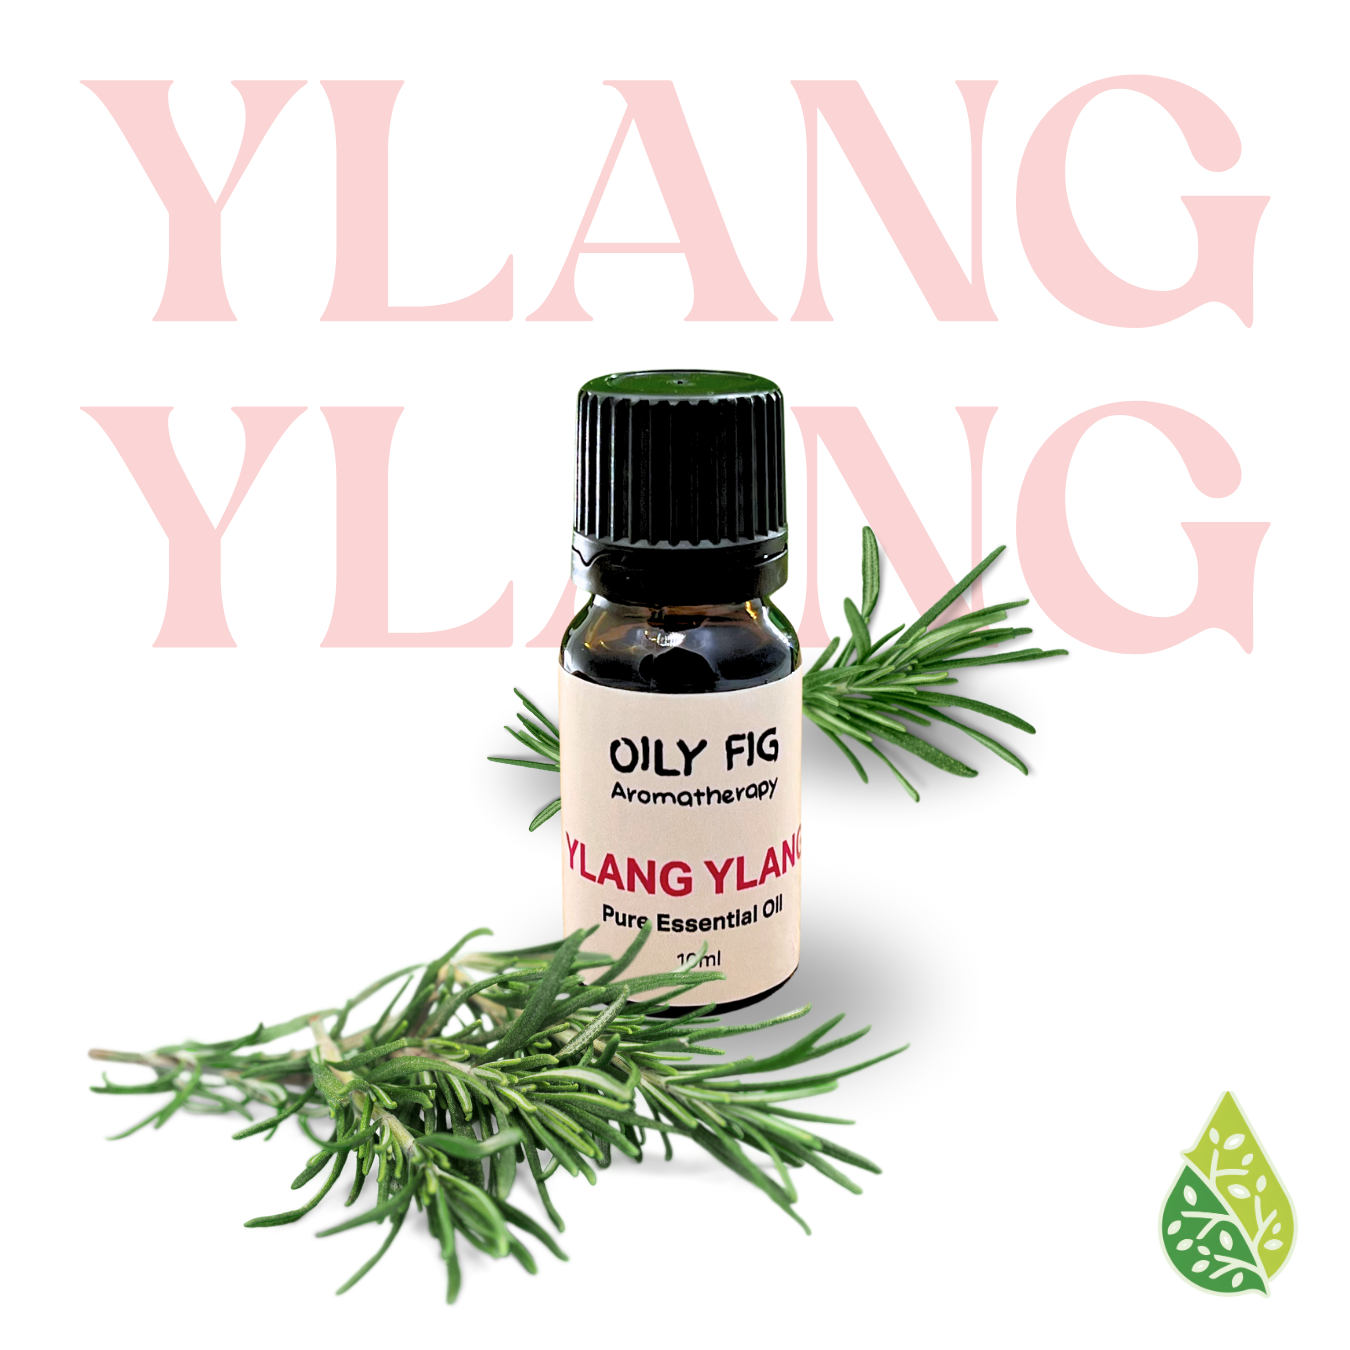 PURE YlangYlang essential oil